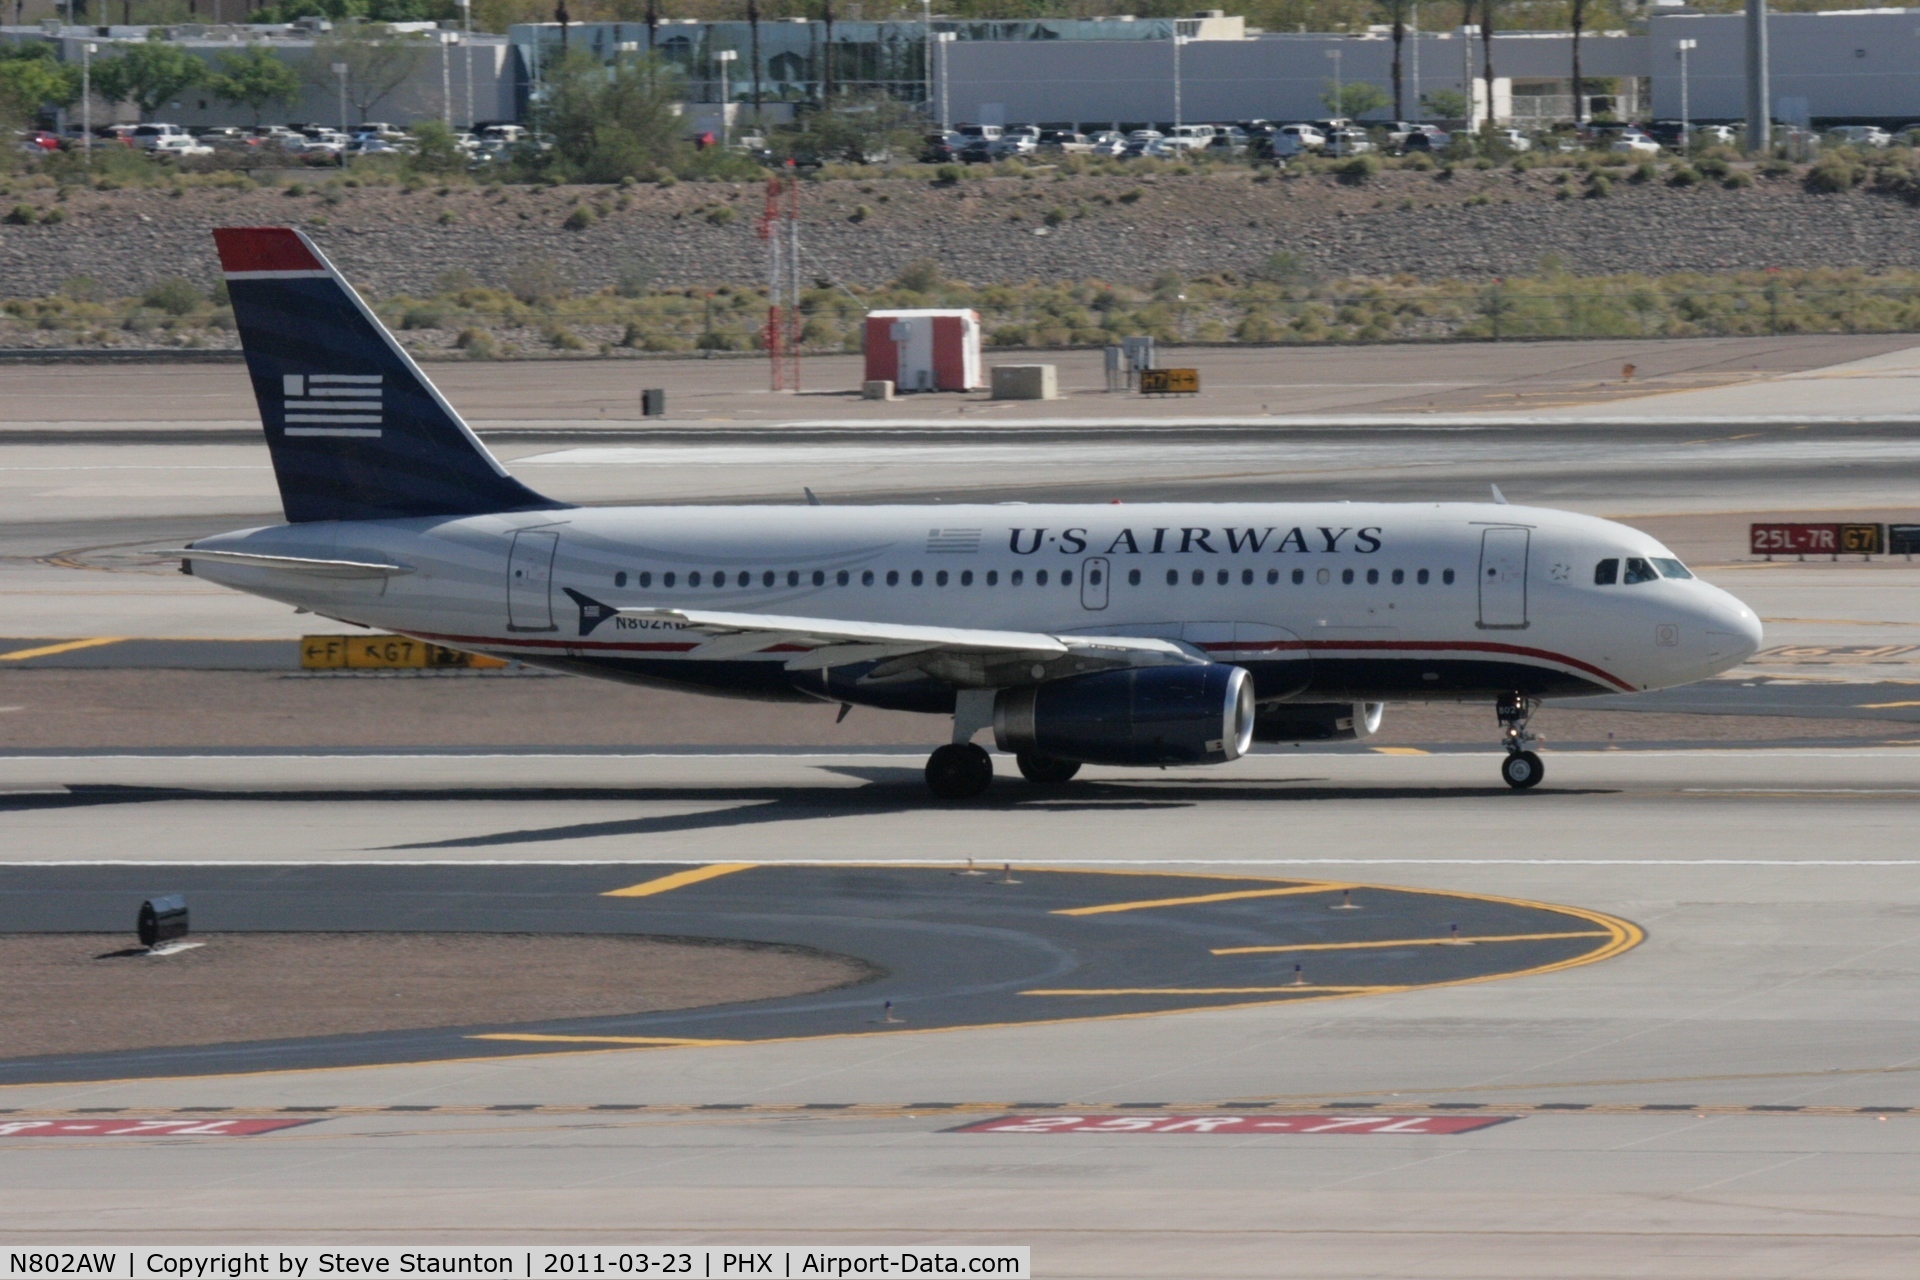 N802AW, 1998 Airbus A319-132 C/N 0924, Taken at Phoenix Sky Harbor Airport, in March 2011 whilst on an Aeroprint Aviation tour